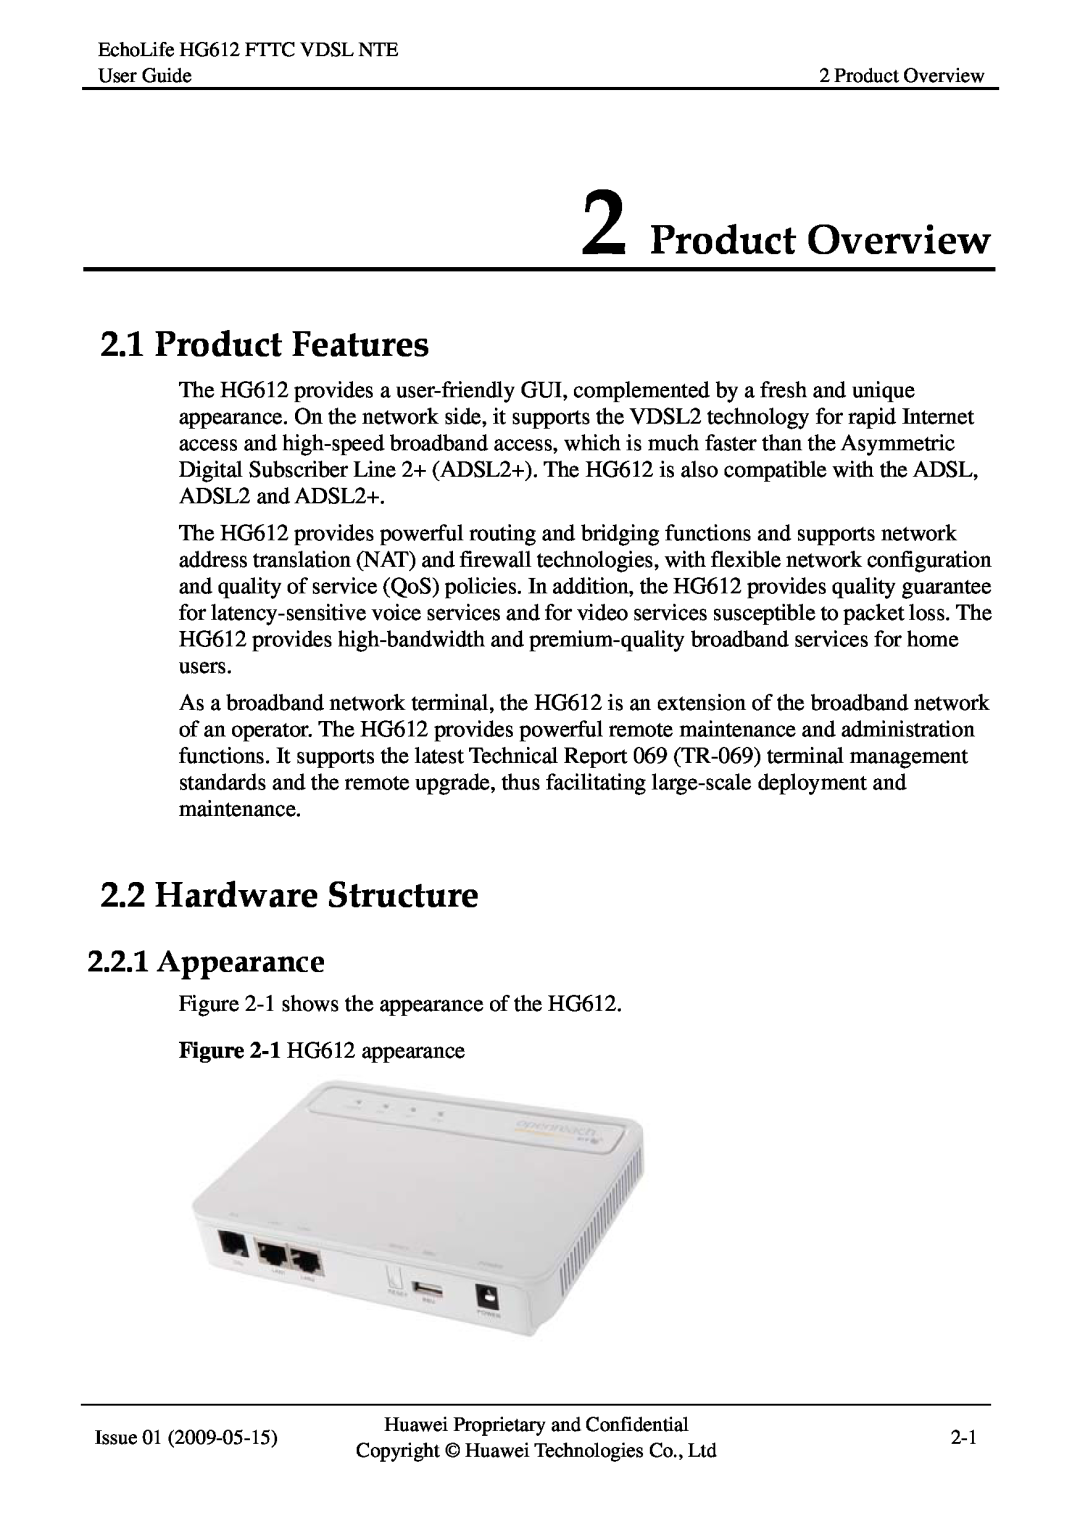 Huawei HG612FTTC VDSL NTE manual Product Overview, Product Features, Hardware Structure, Appearance 